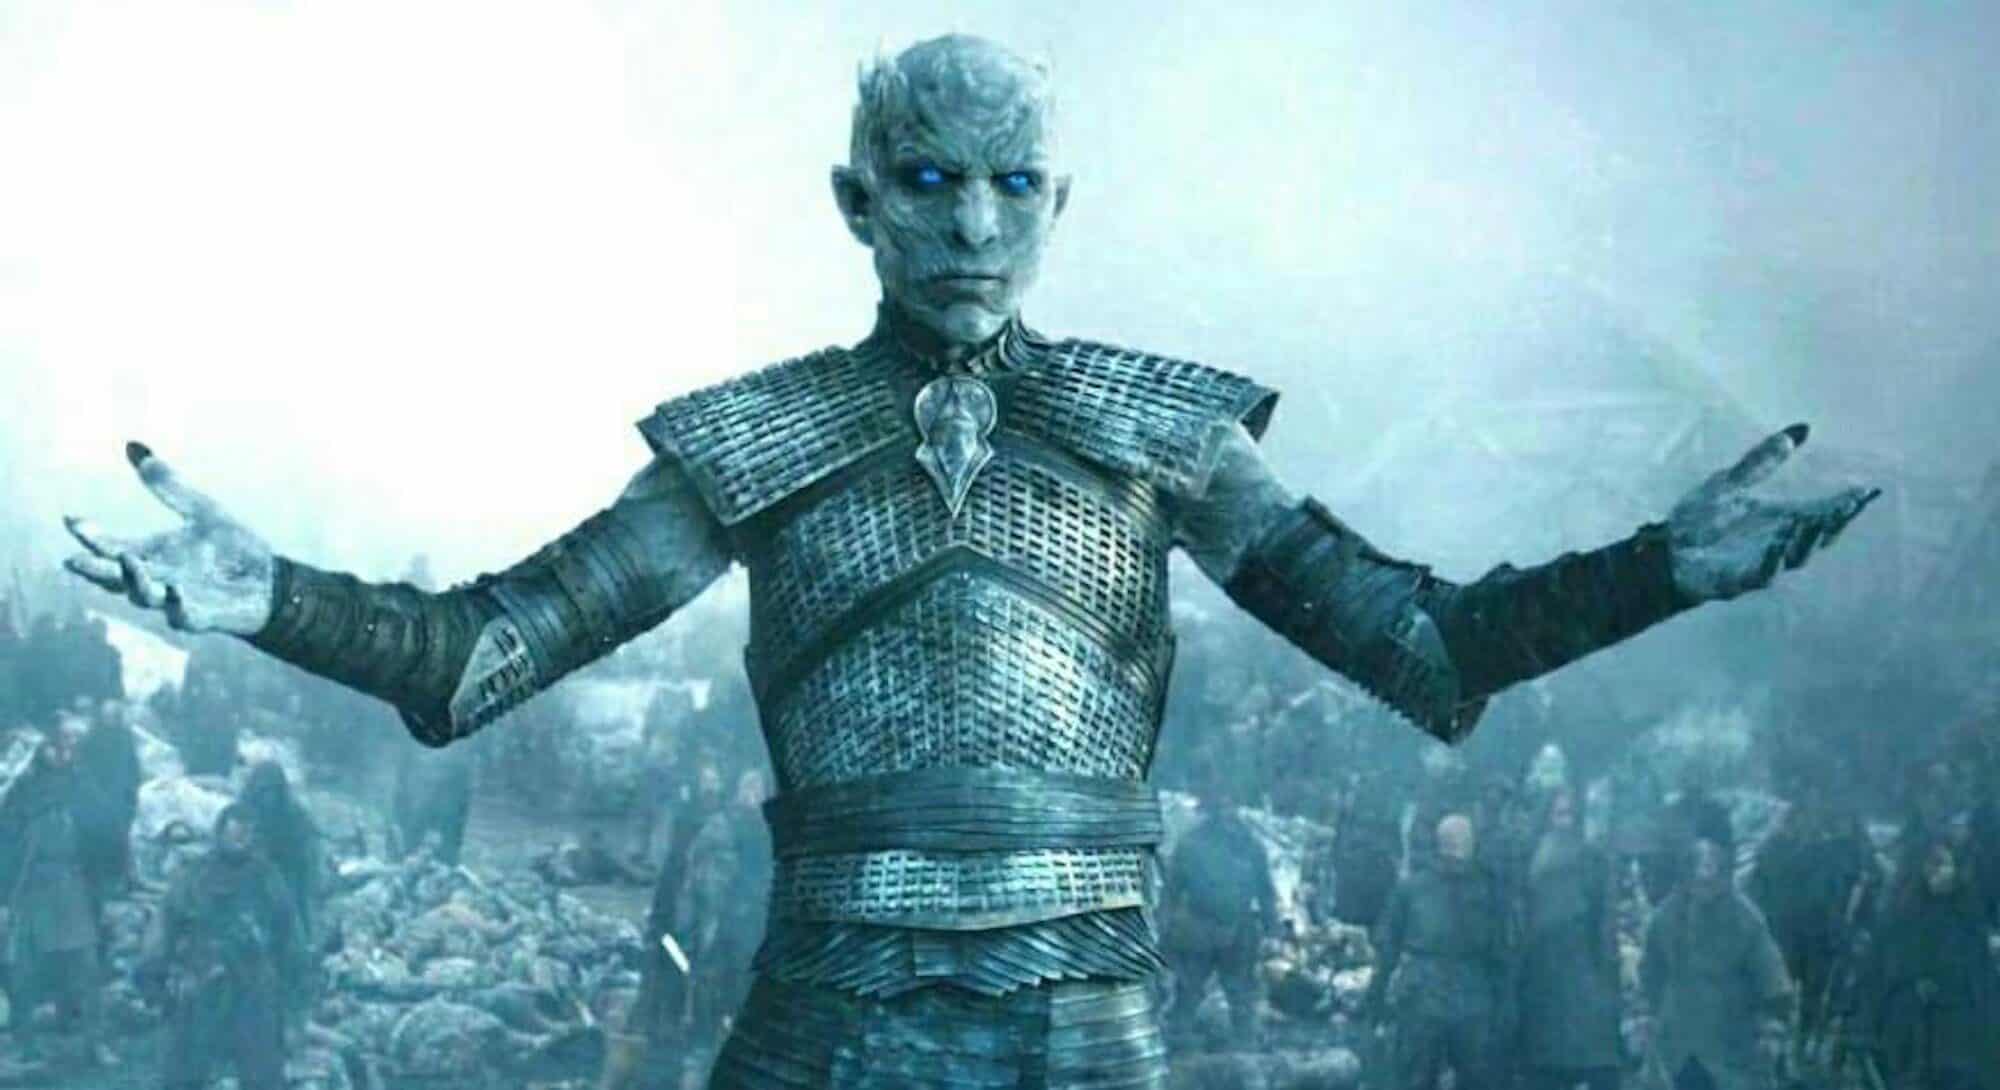 Night King (A Game of Thrones)